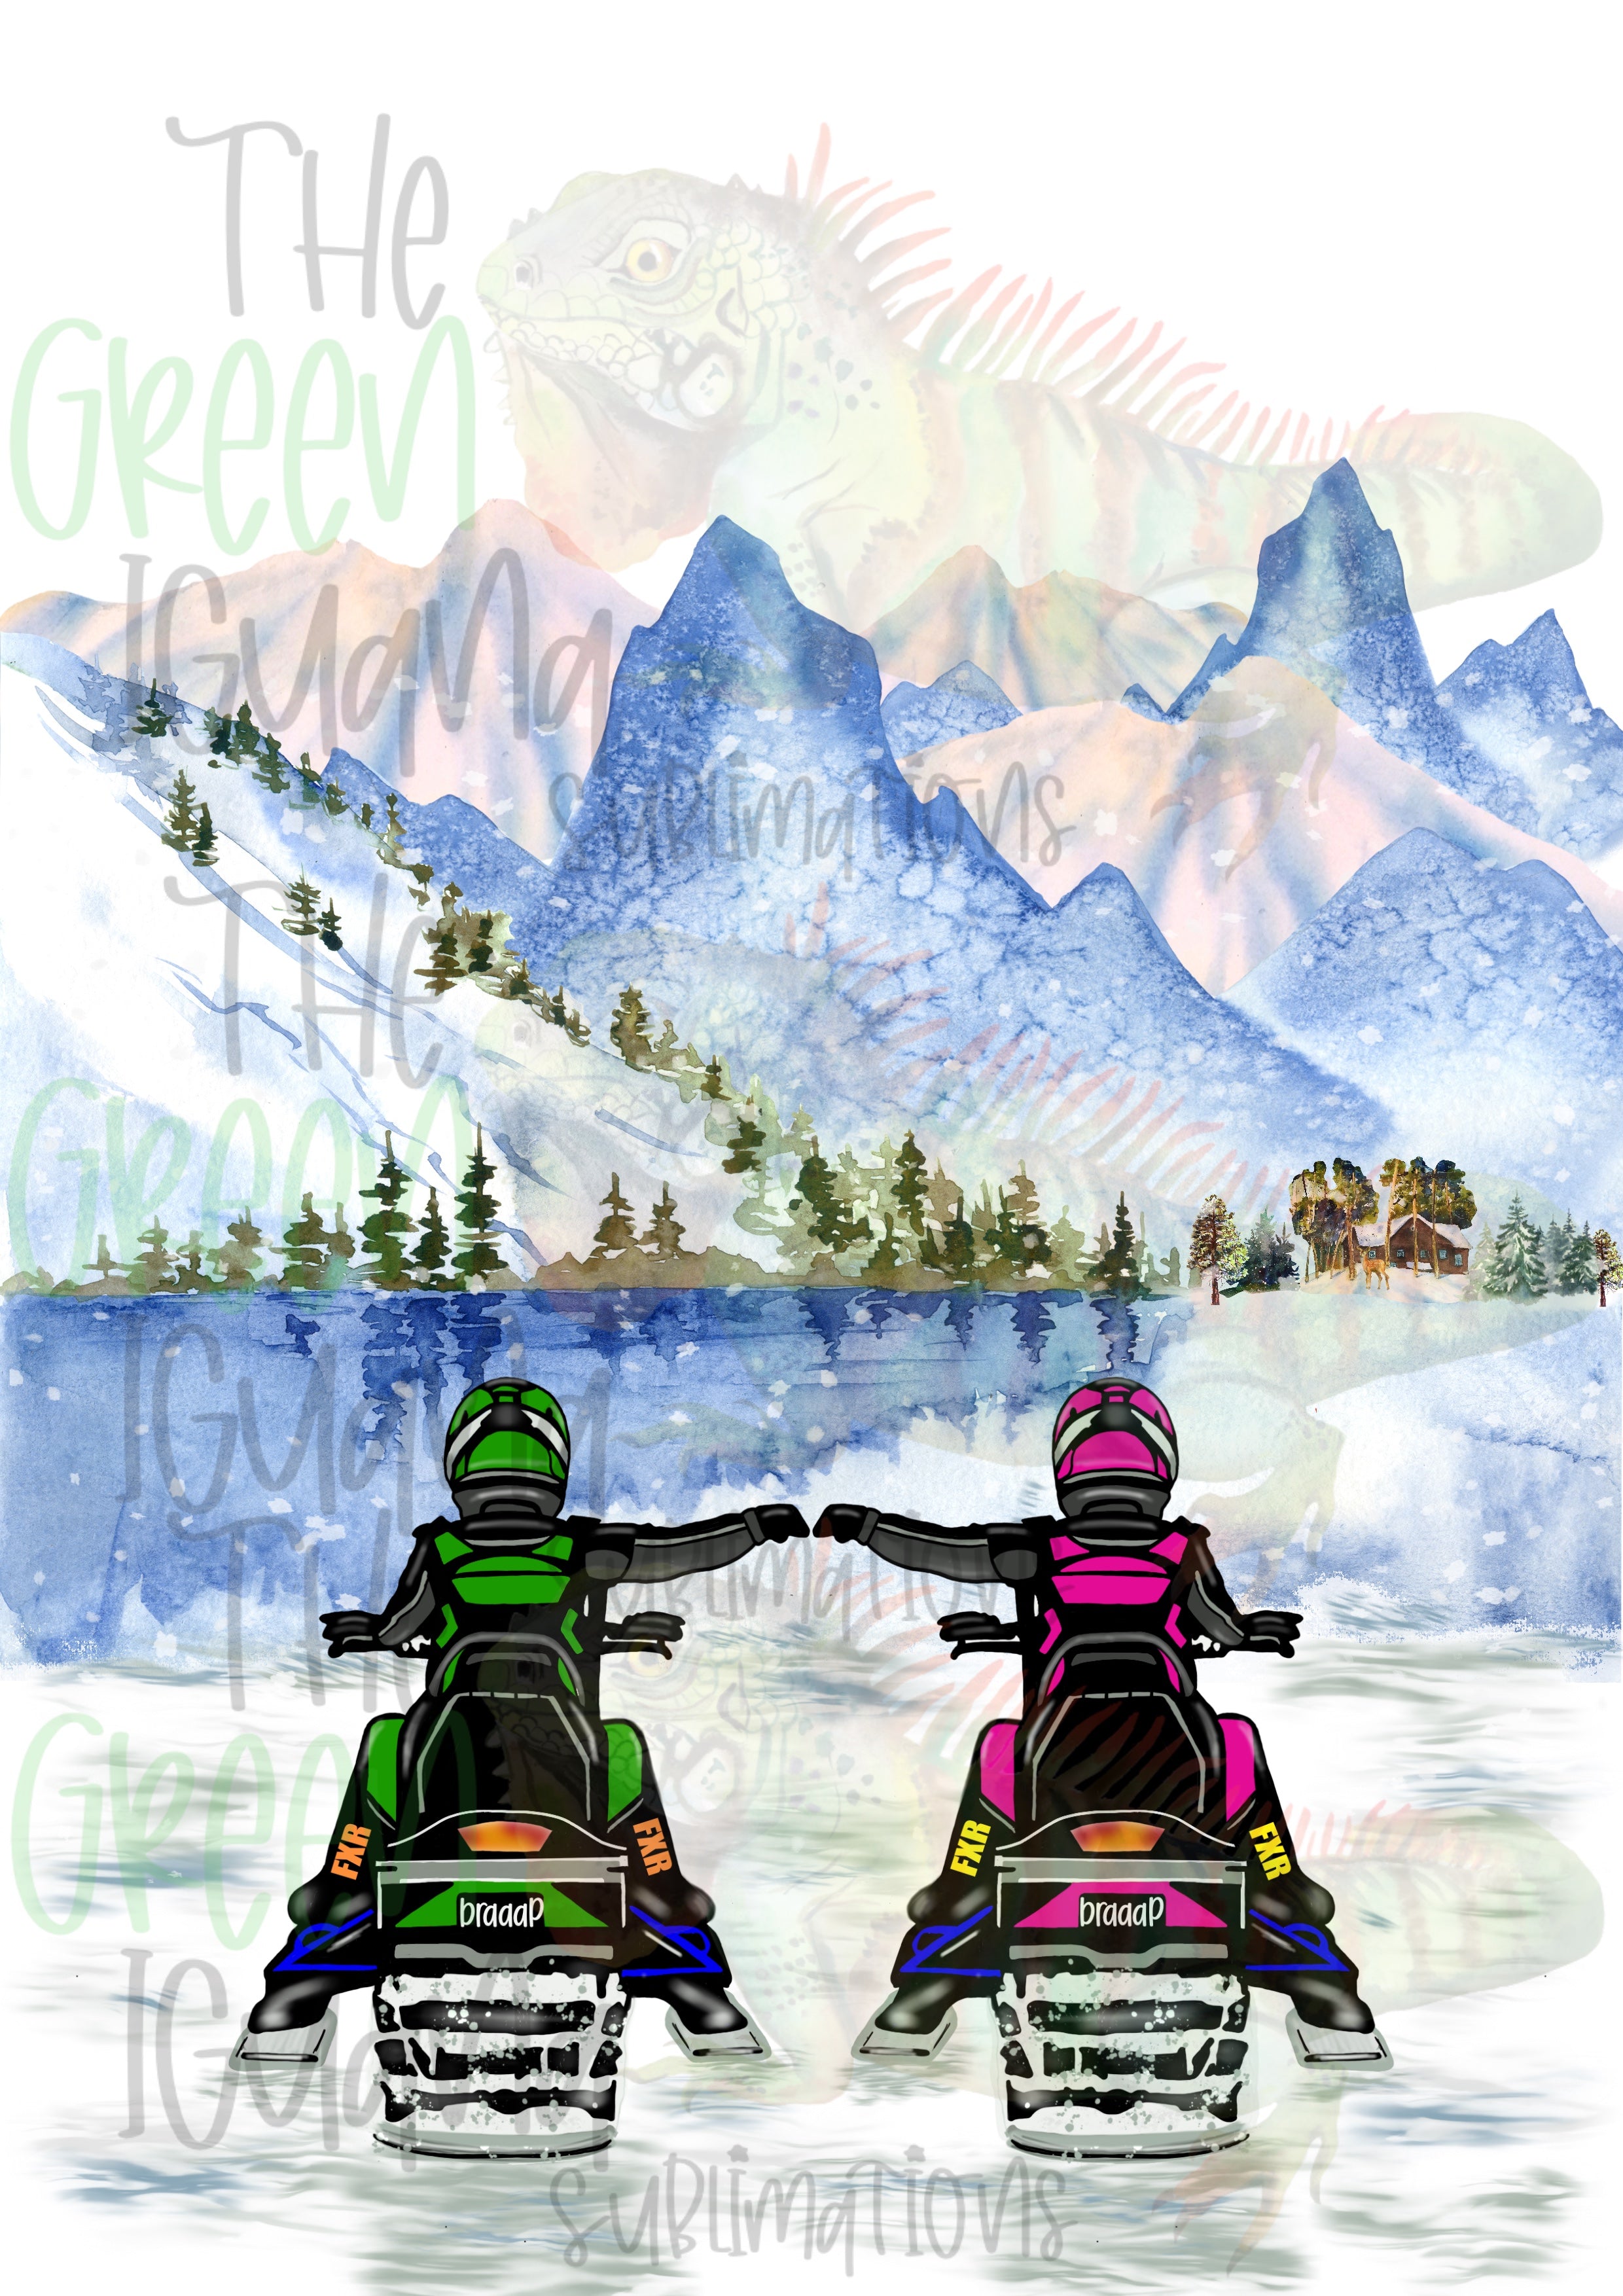 Snowmobile couple/friends - lime green & pink